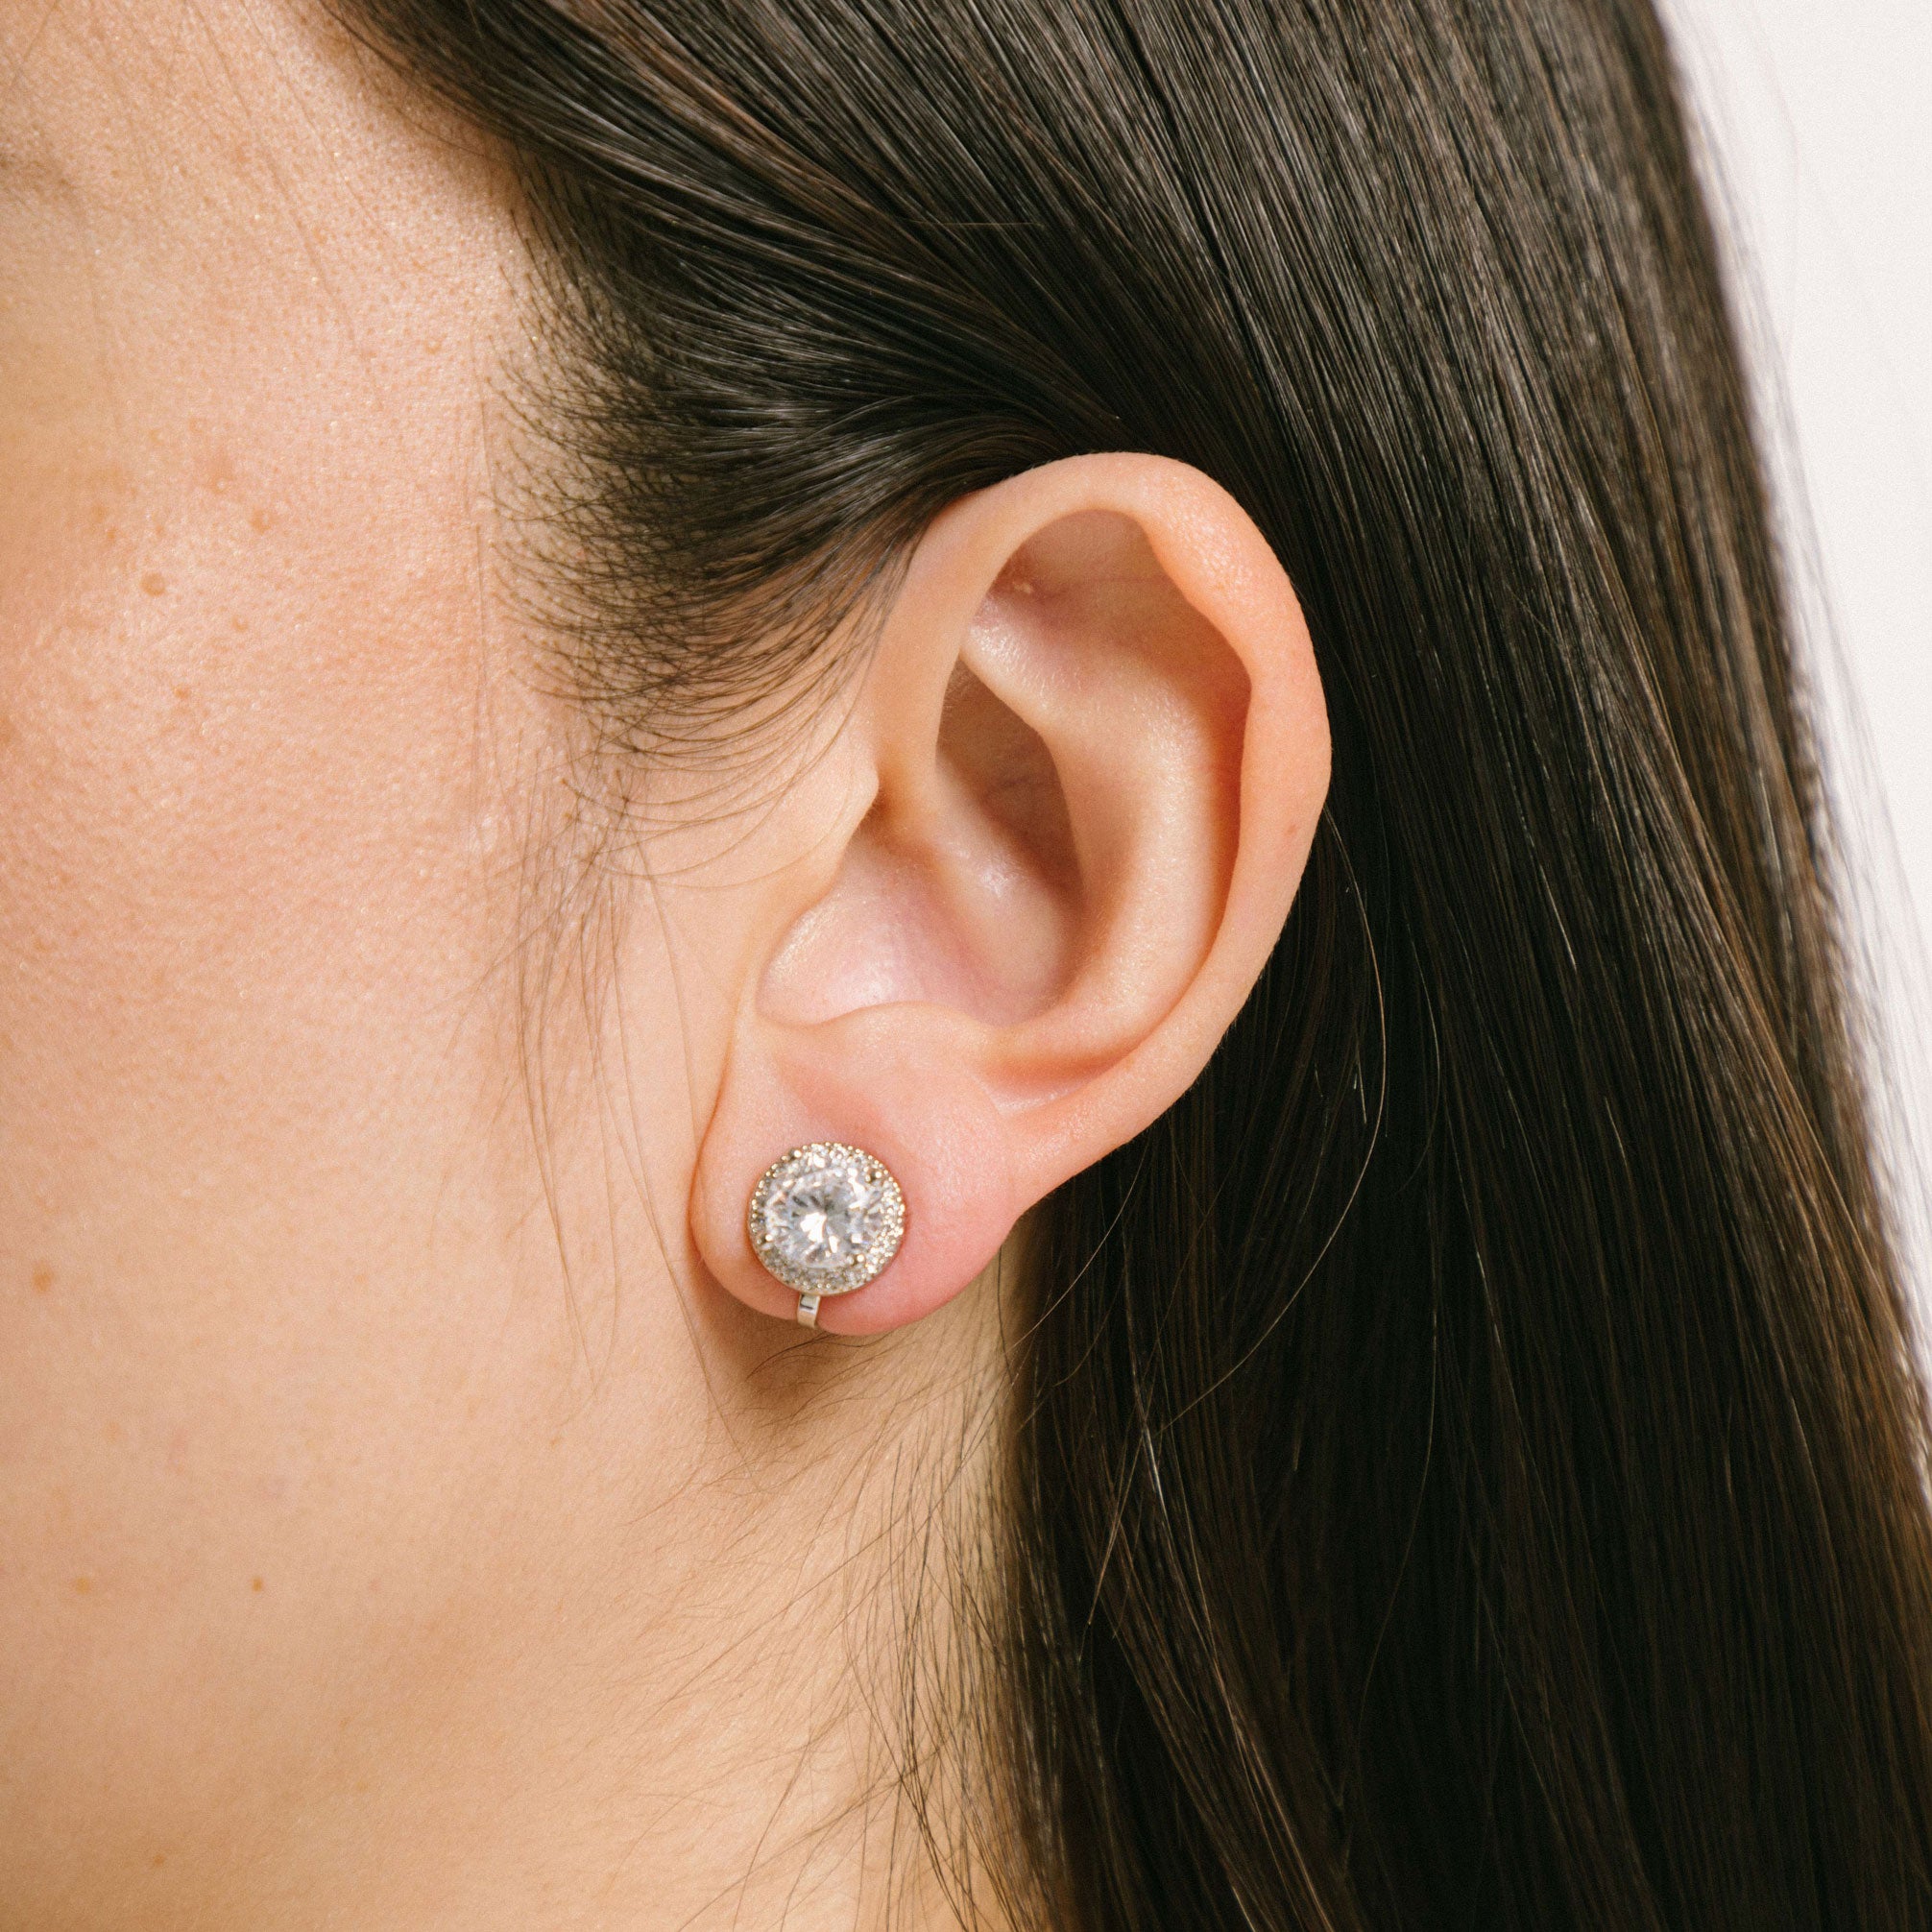 A model wearing the Harper Stud clip-on earrings features a secure hold, with a maximum comfortable wear duration of 8 to 12 hours. It is ideal for all ear types, including thick/large, sensitive, small/thin, and stretched/healing types. It is made with a silver-tone copper alloy and cubic zirconia, and comes with a removable rubber padding for added comfort. Please note: only one pair is included.